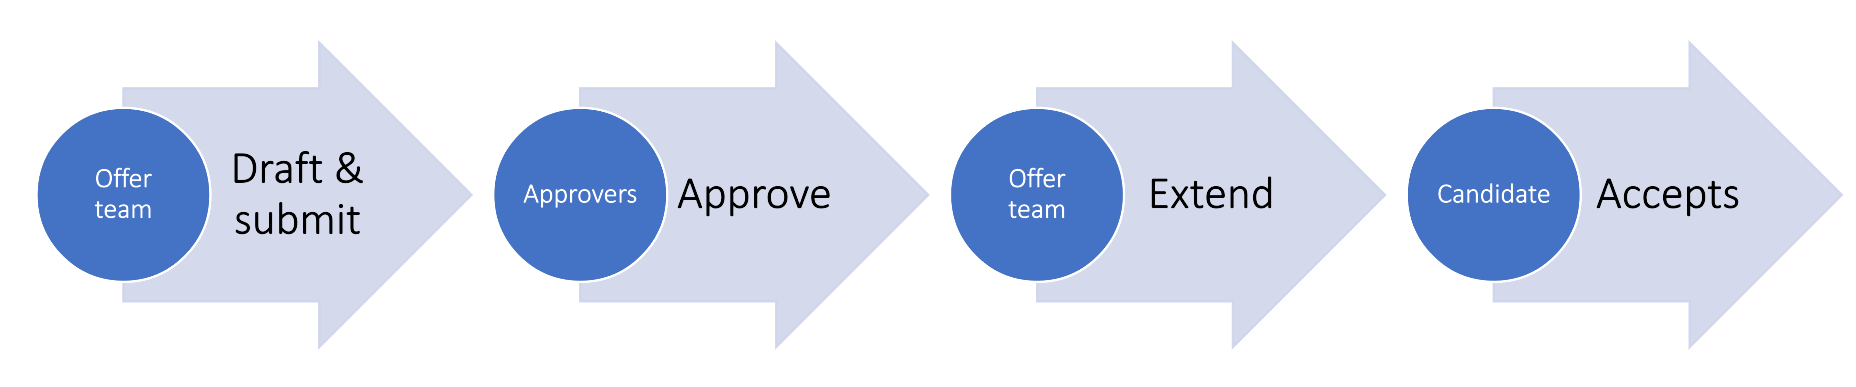 Job offer lifecycle